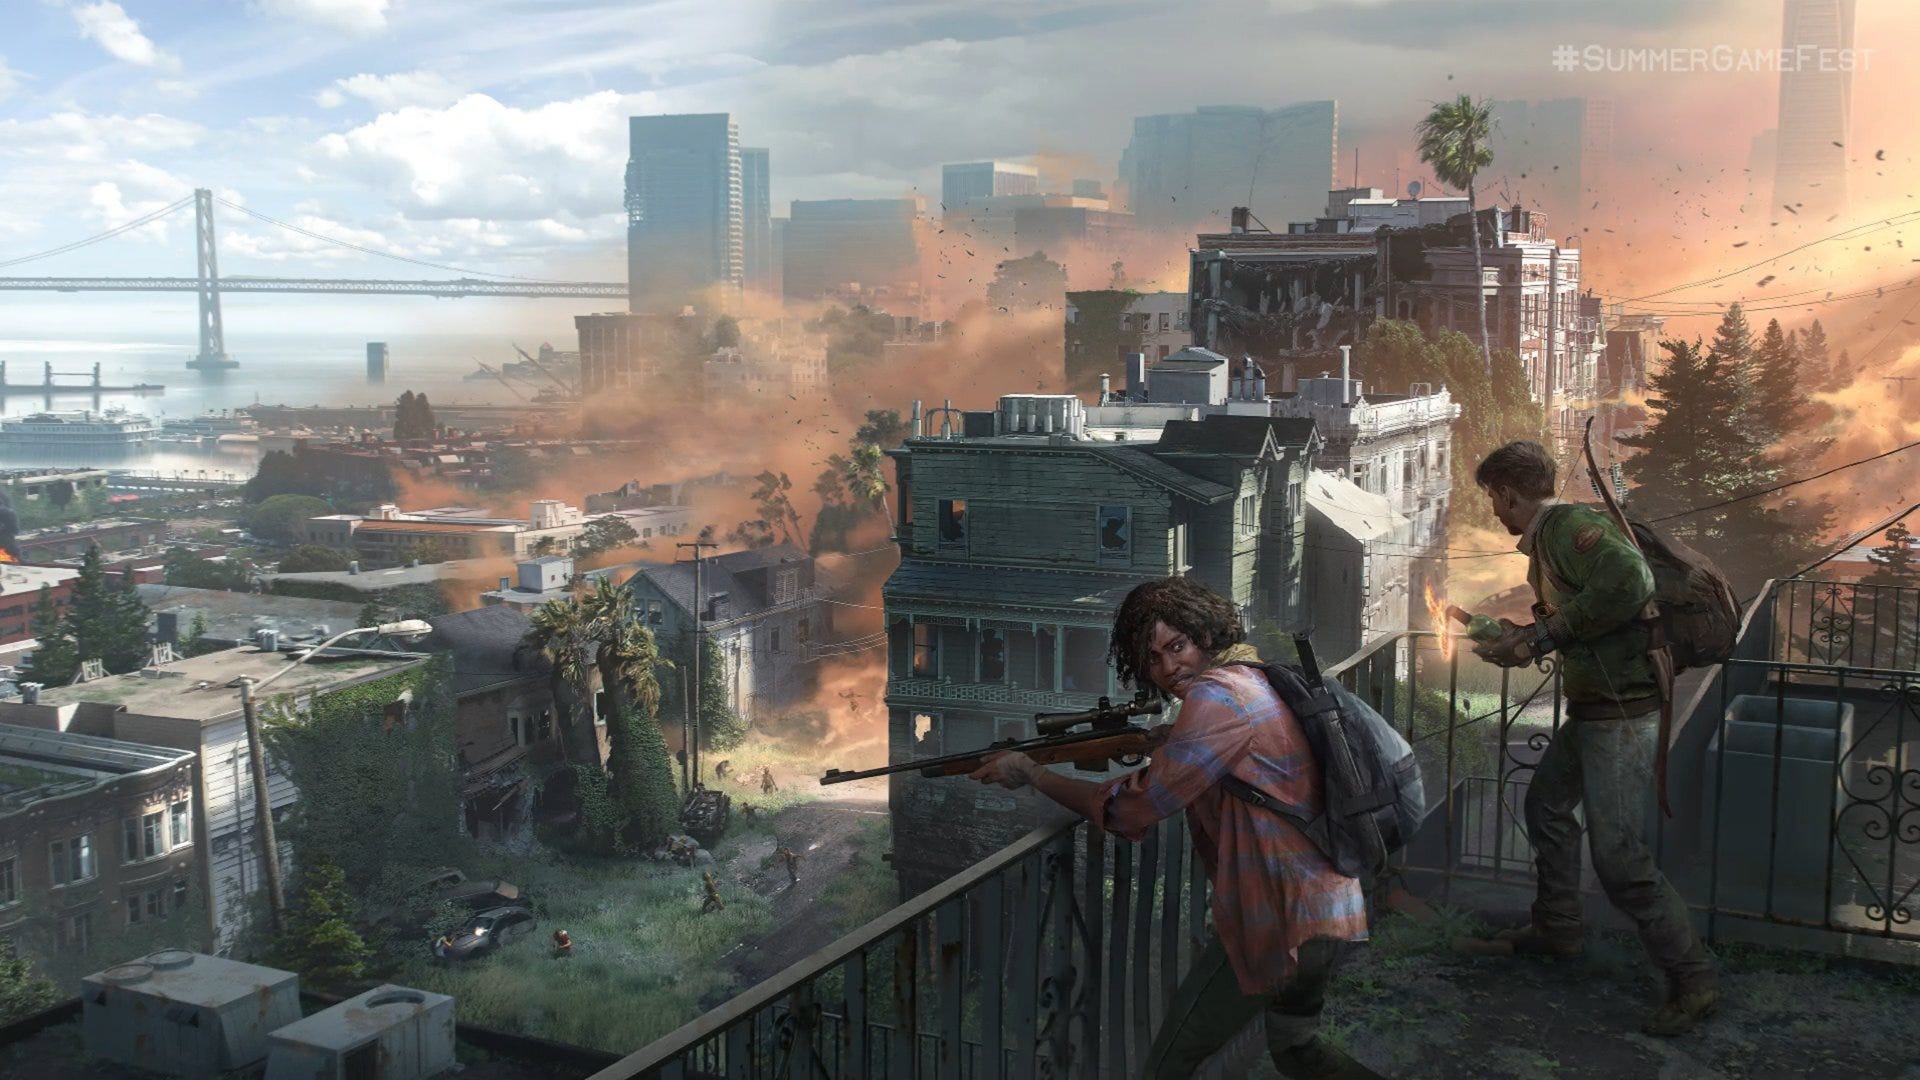 Naughty Dog says The Last of Us multiplayer game needs “more time”